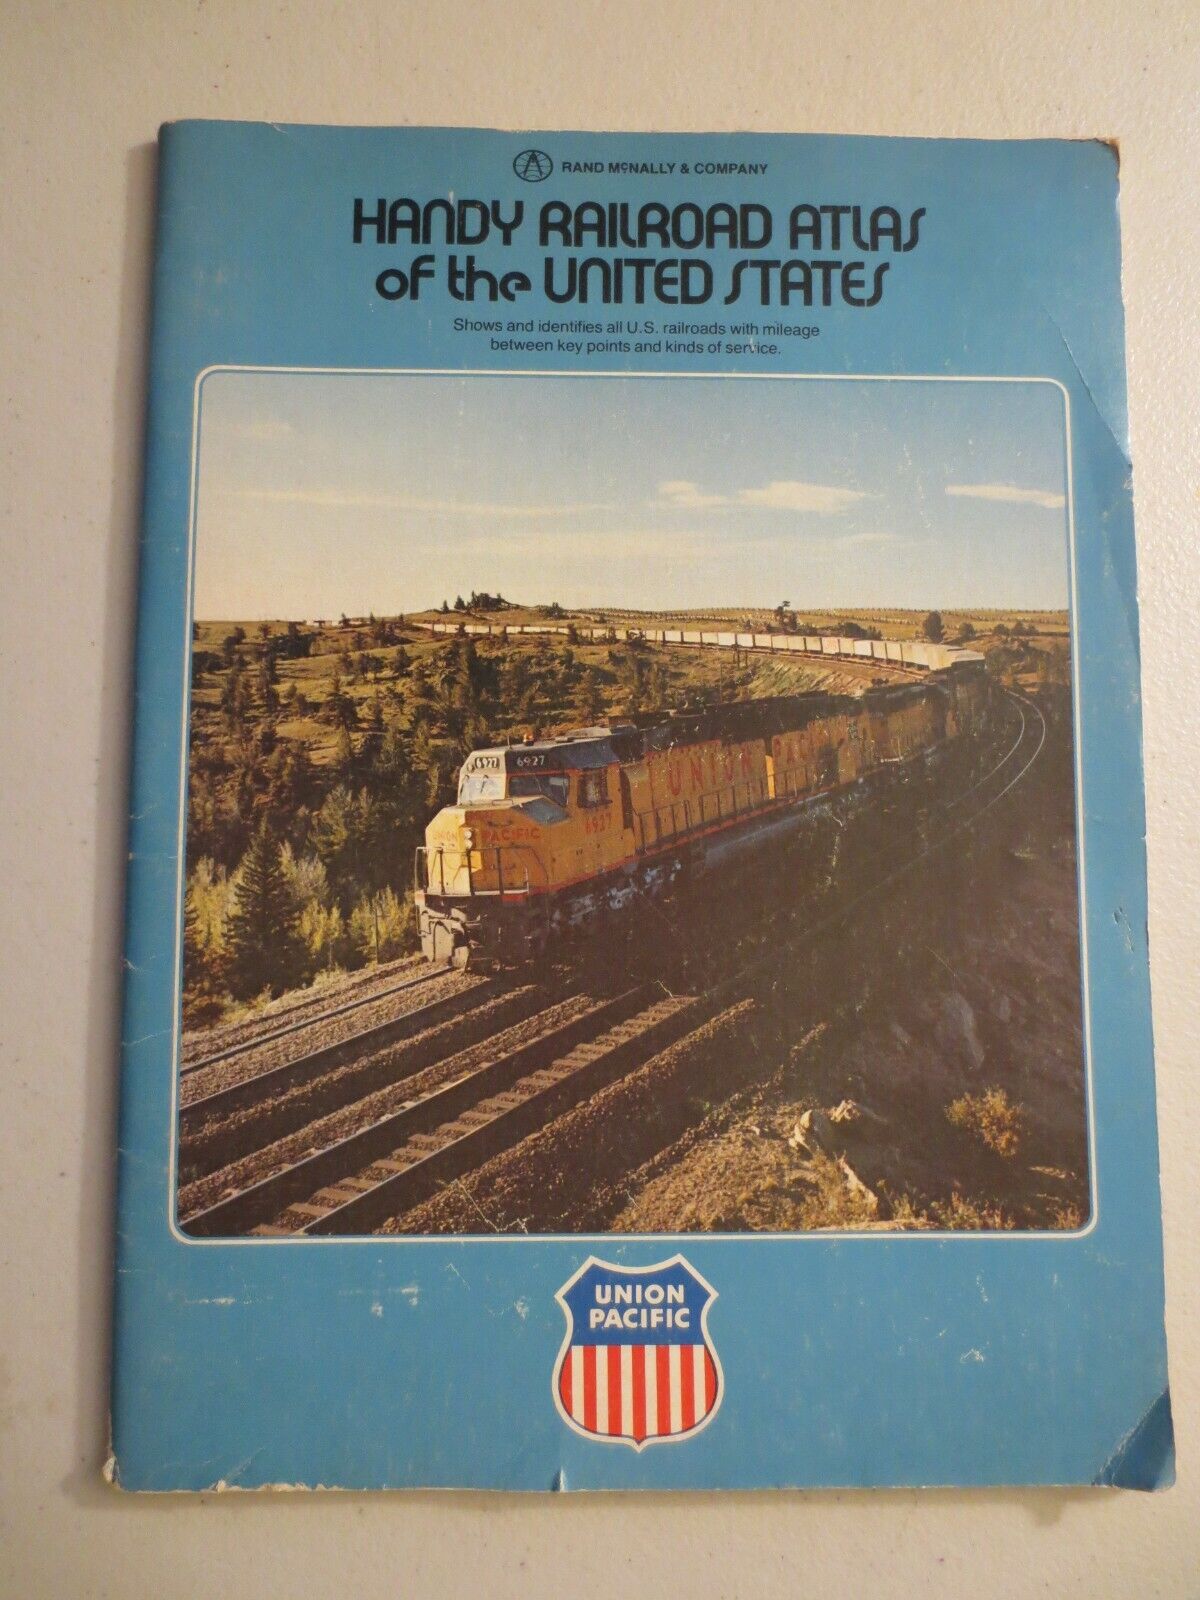 HANDY RAND MCNALLY RAILROAD ATLAS OF THE UNITED STATES (MARKED FOR UNION PACIFIC